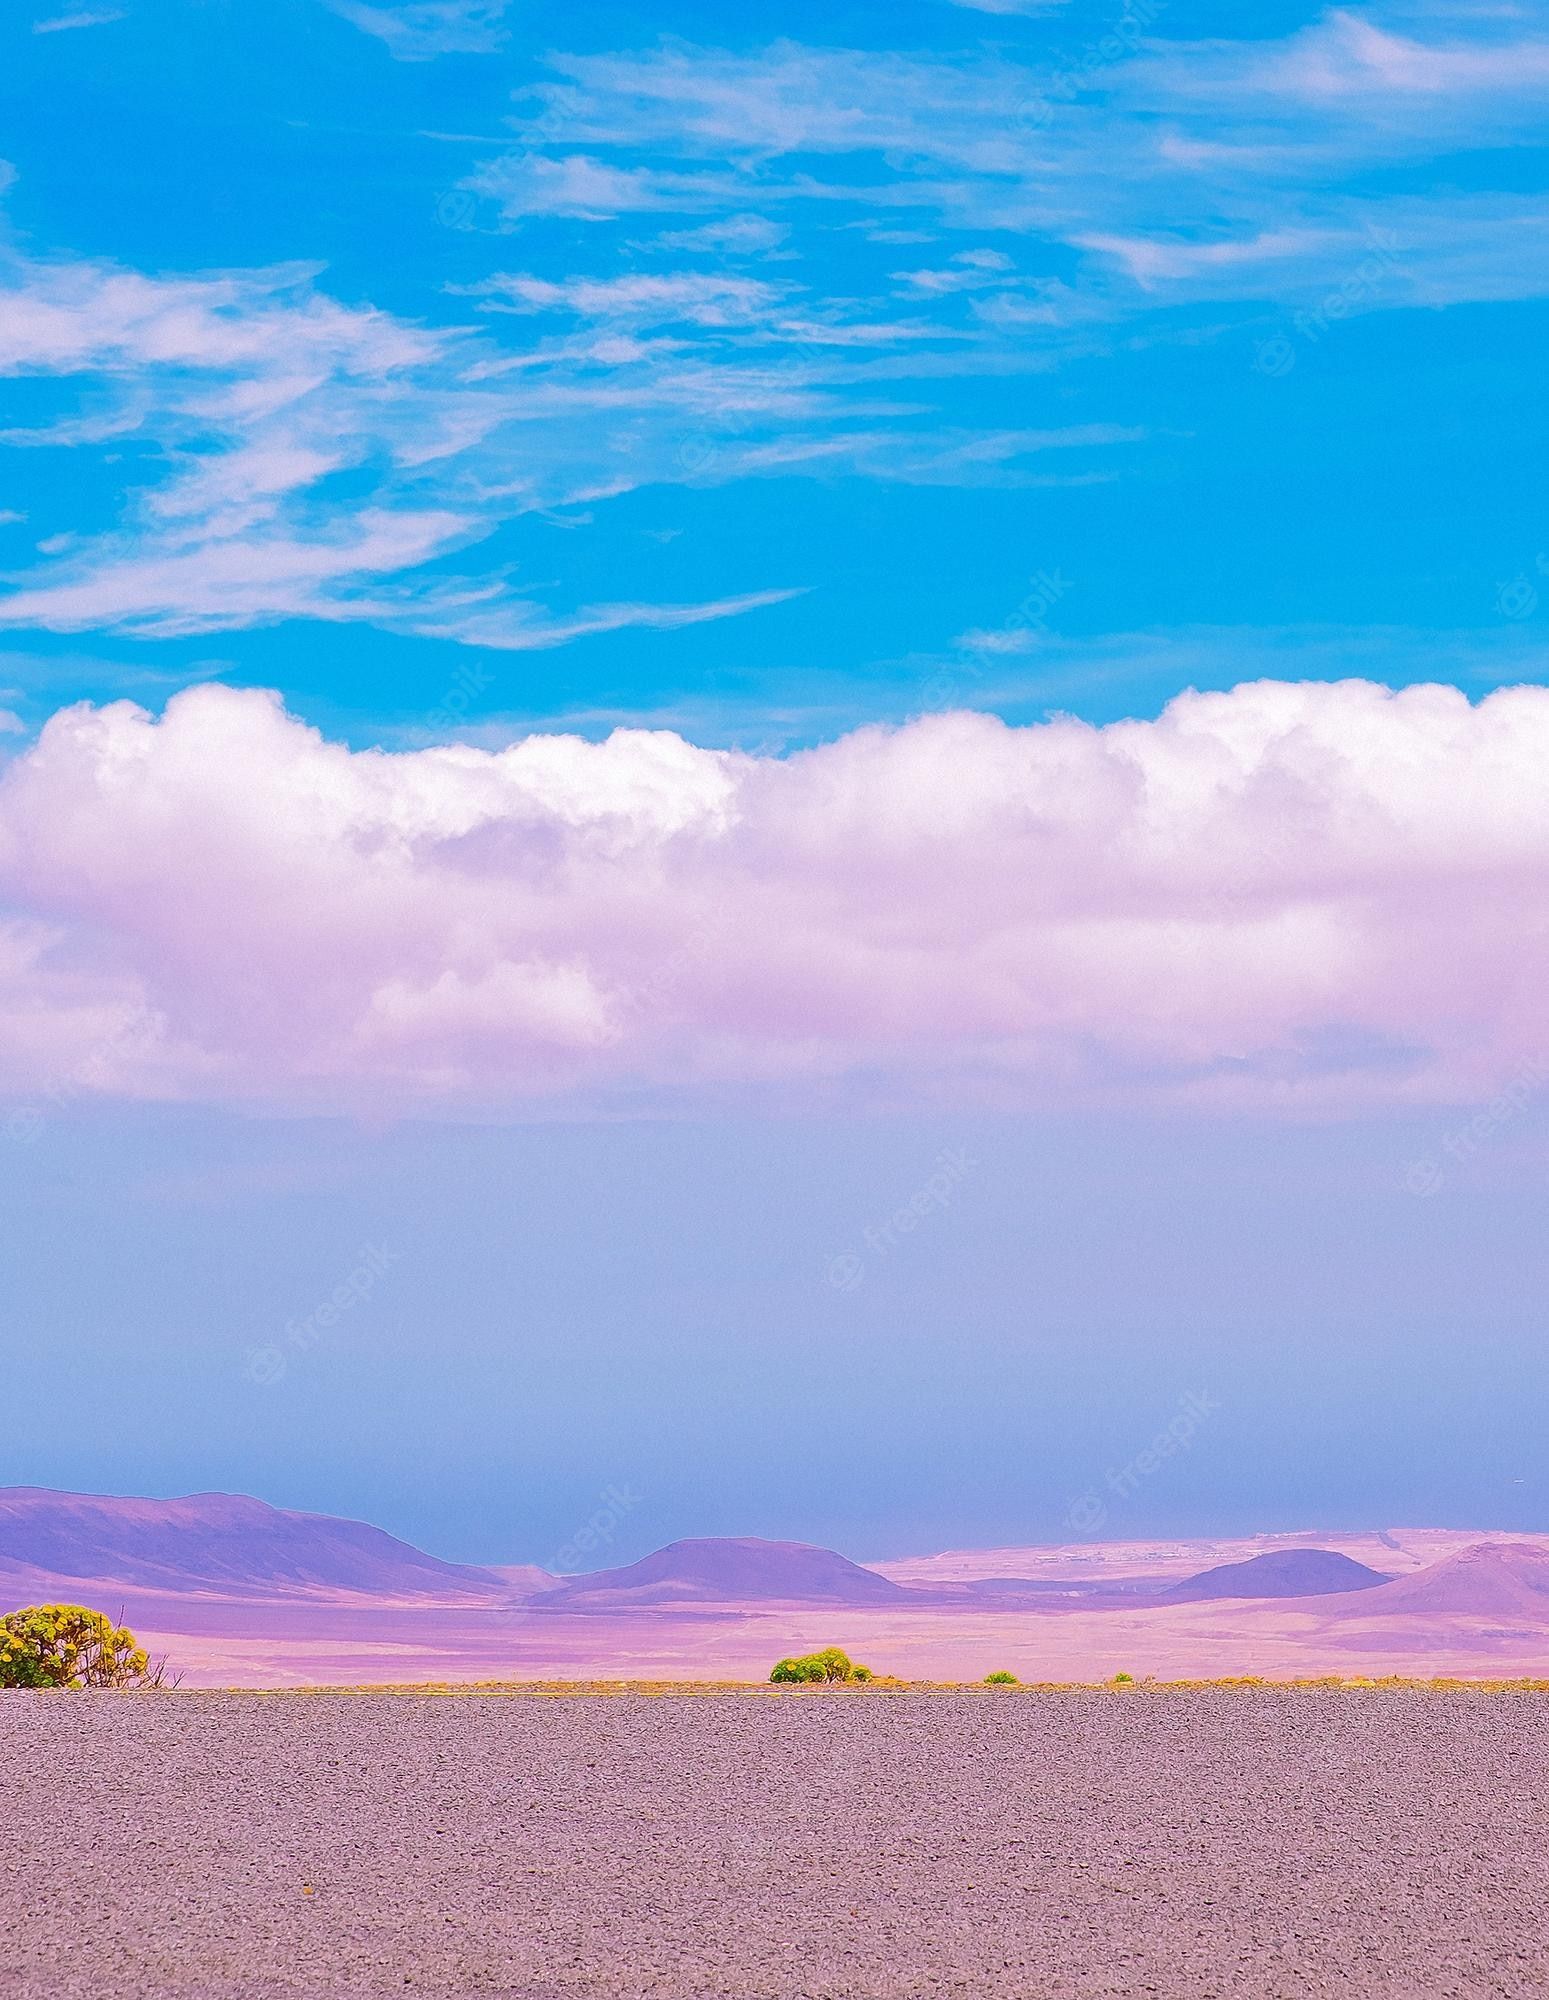 A desert landscape with a blue sky and clouds - Desert